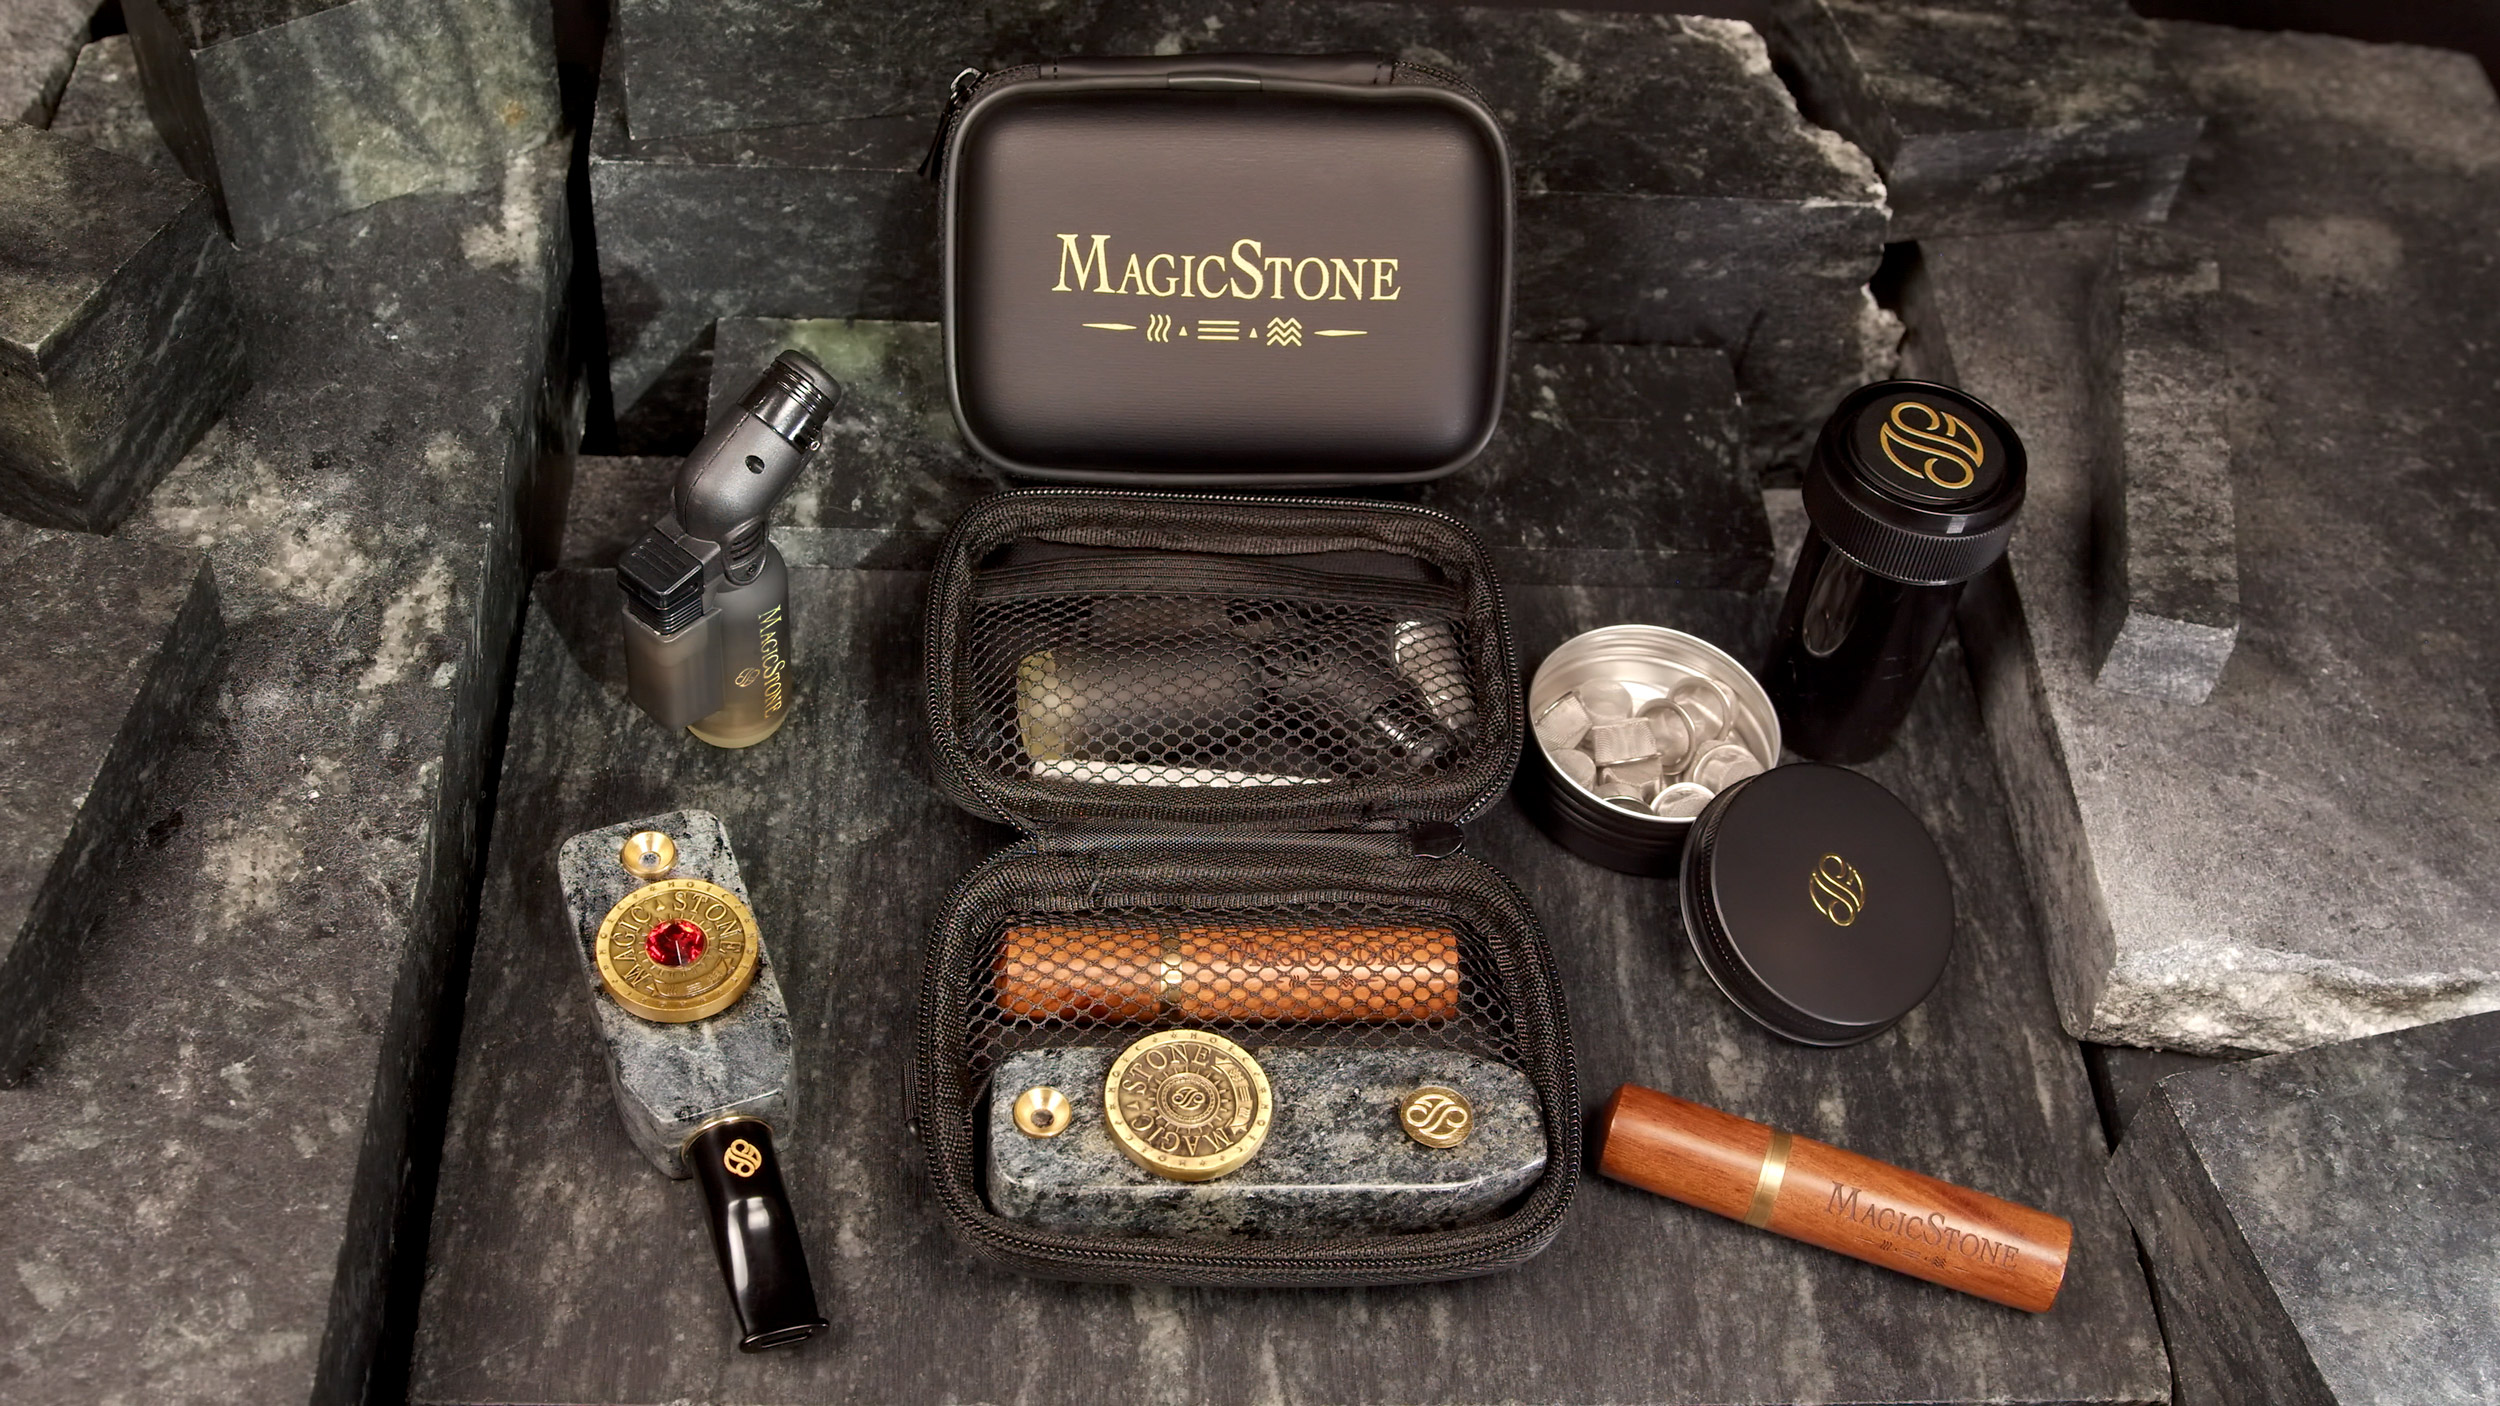 MagicStone smokeless instruments come in a complete curated kit with everything you need for a lifetime of virtually maintenance-free enjoyment.